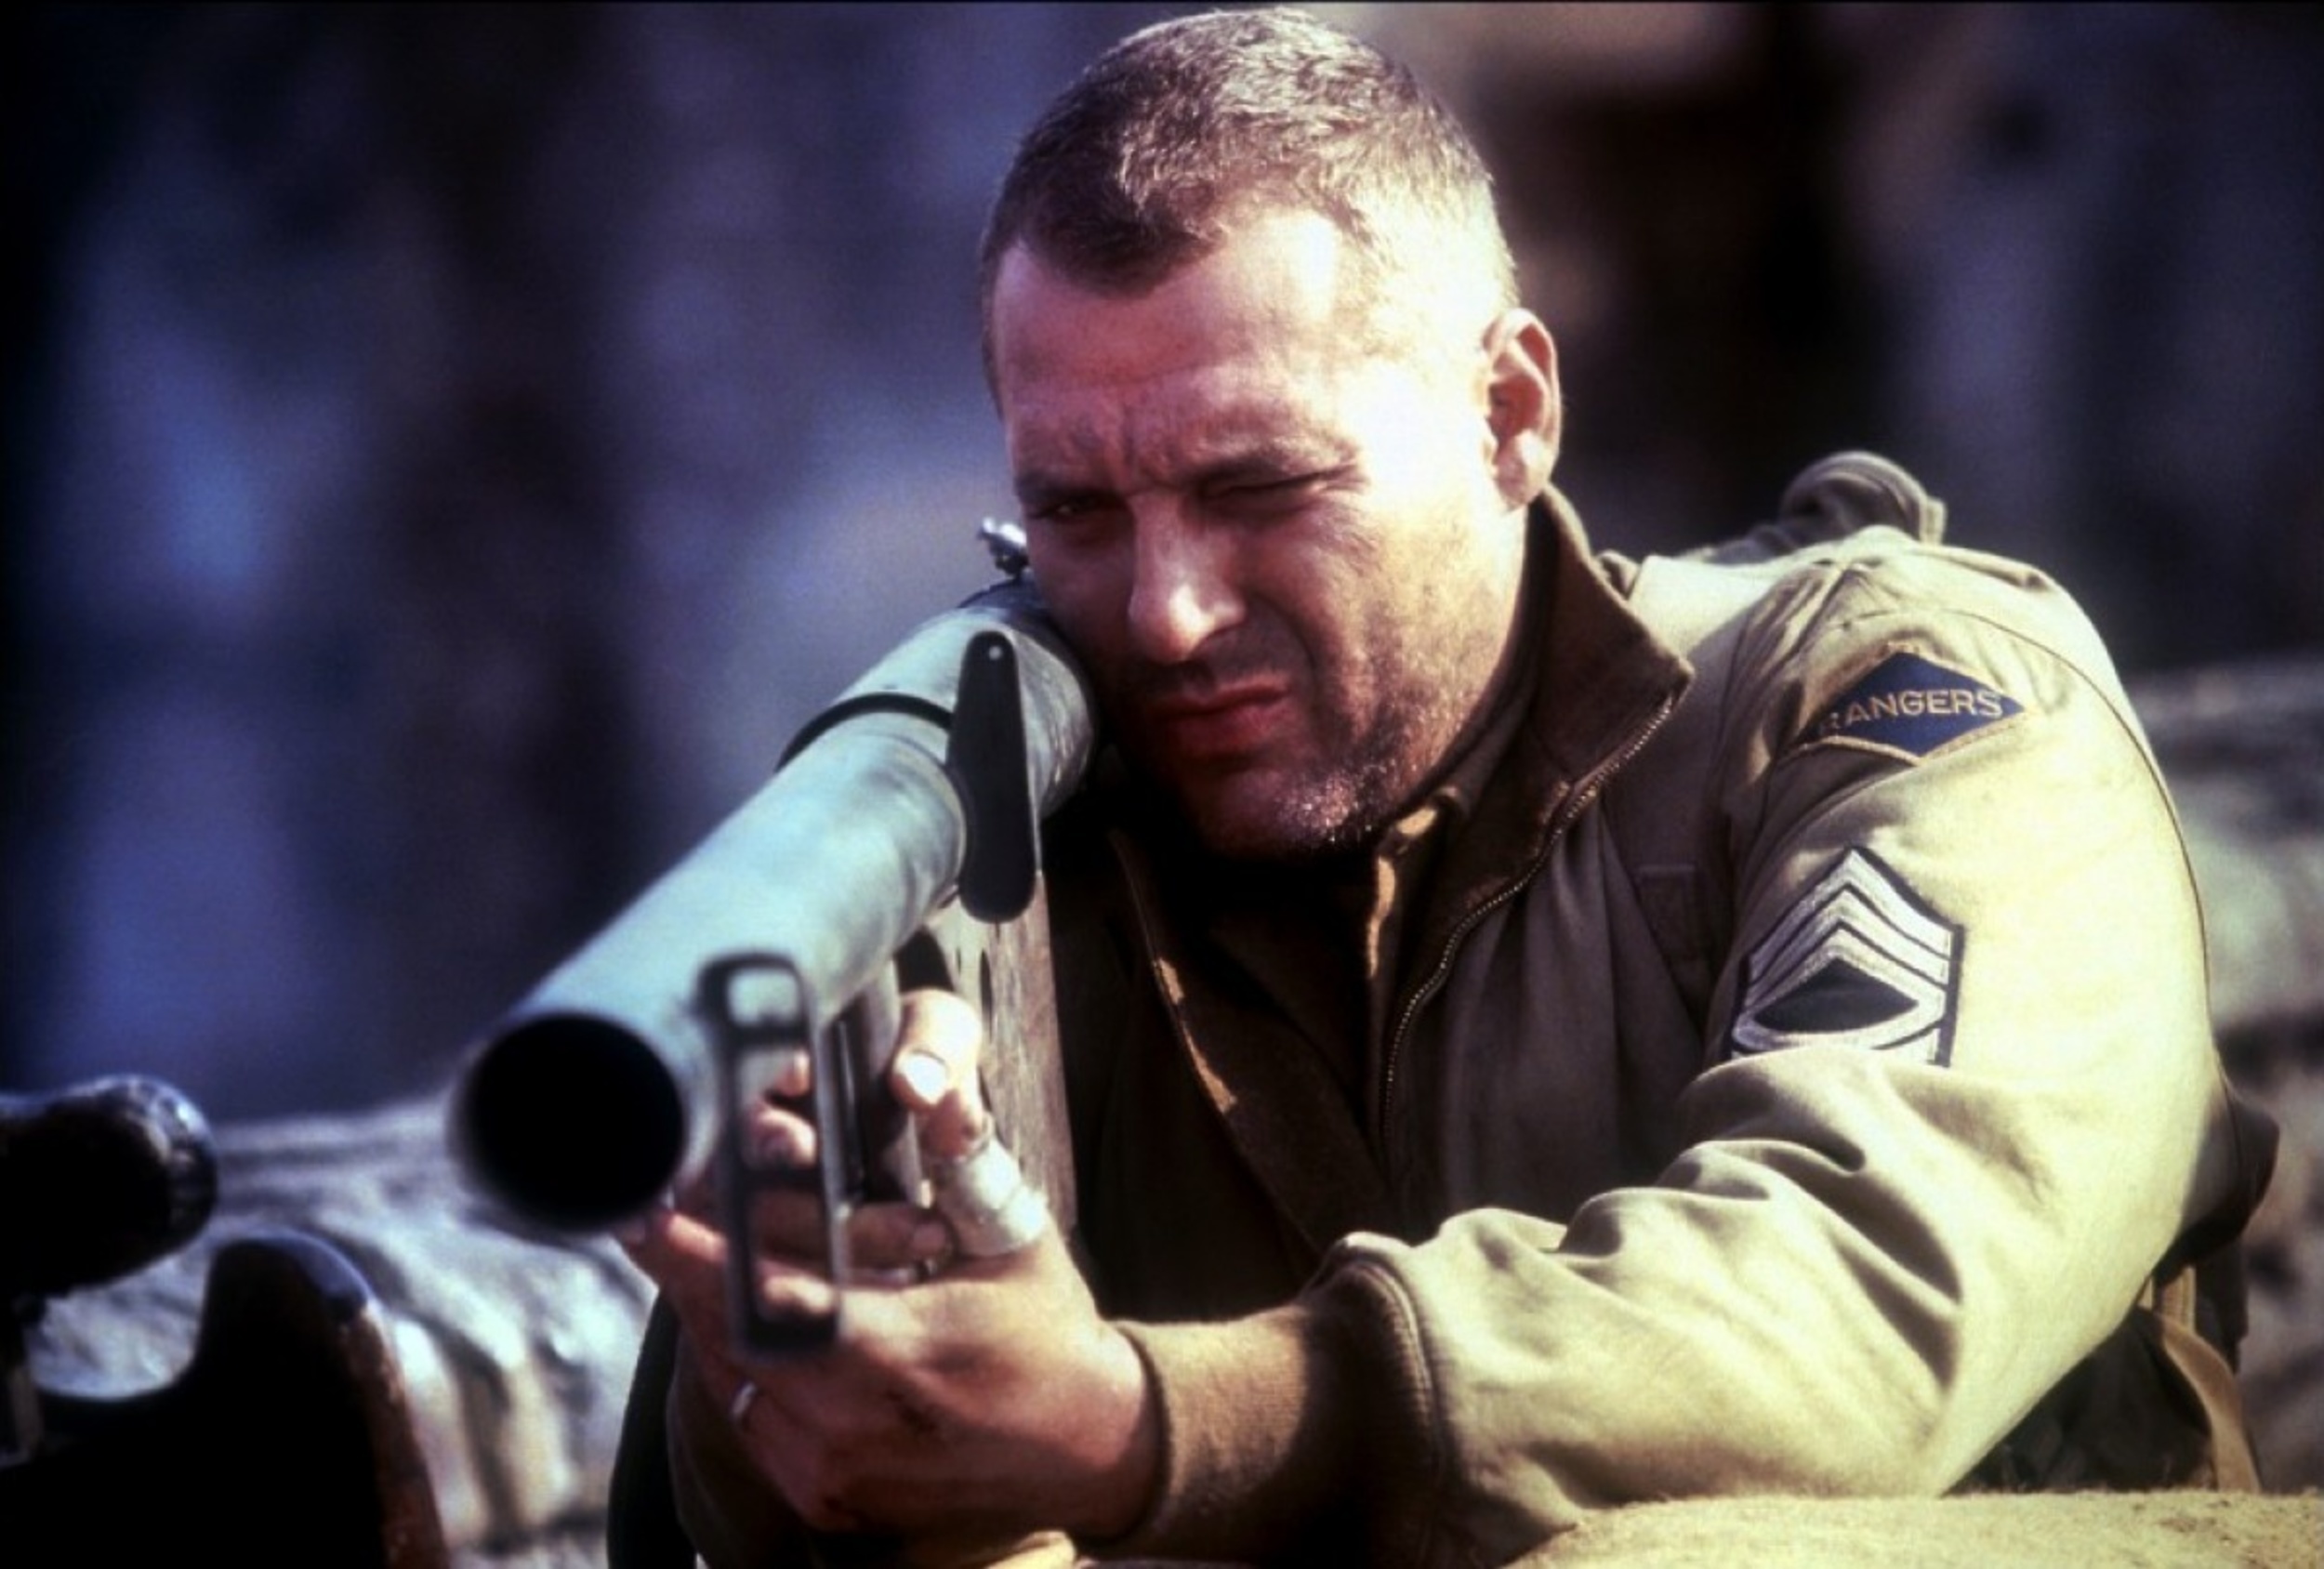 <p>Tom Sizemore’s problems are well known. While filming <em>Saving Private Ryan</em>, he was trying to kick a drug addiction. Things were so severe Spielberg had him drug tested every day. He would have been recast on the spot if he had failed a test.</p><p>You may also like: <a href='https://www.yardbarker.com/entertainment/articles/21_of_country_musics_greatest_voices/s1__38994195'>21 of country music's greatest voices</a></p>